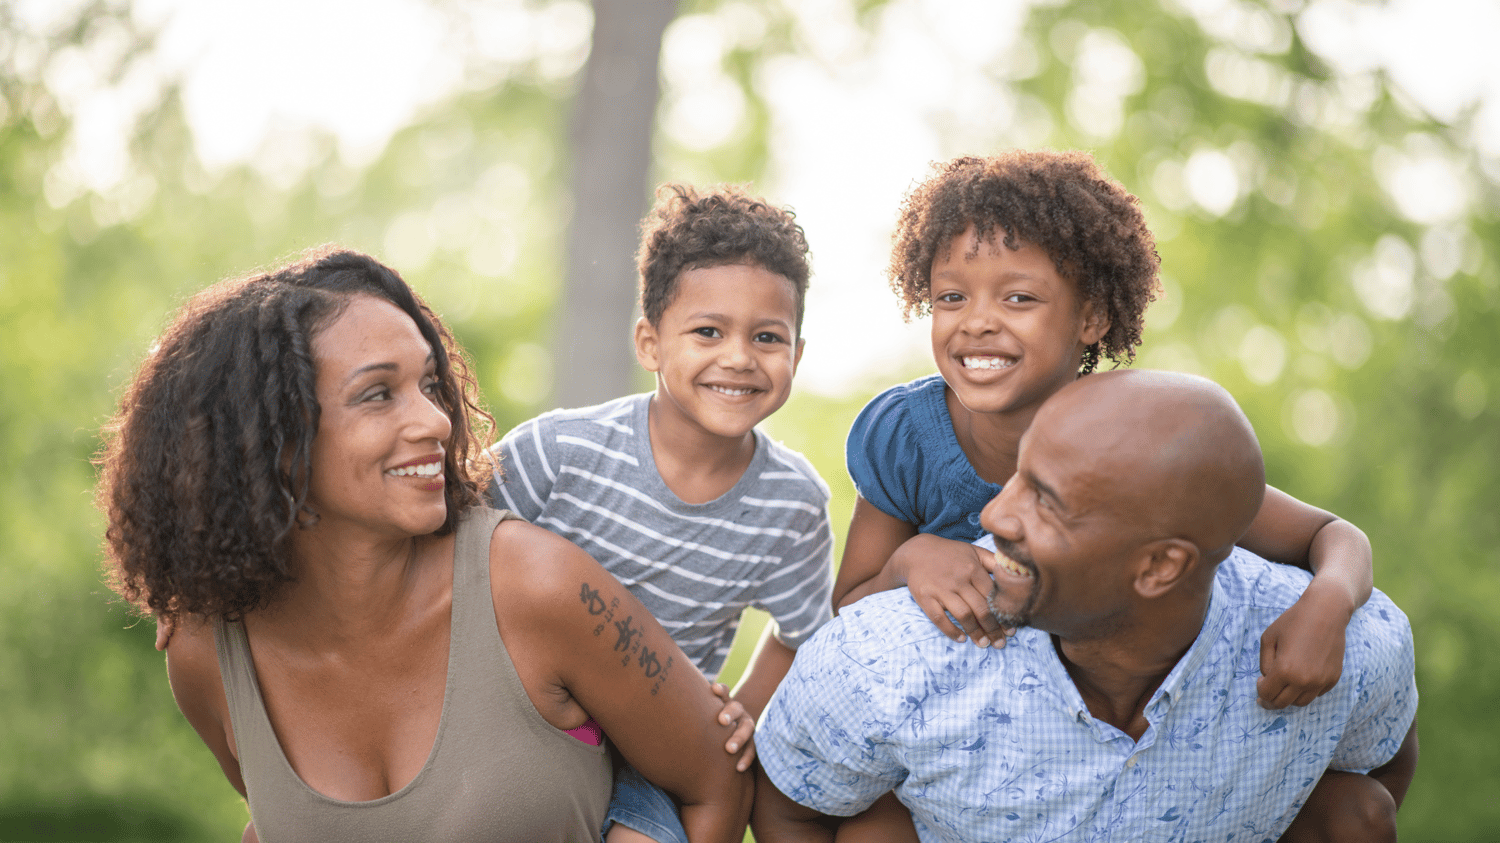 THE TOP 5 WAYS TO CREATE GENERATIONAL WEALTH